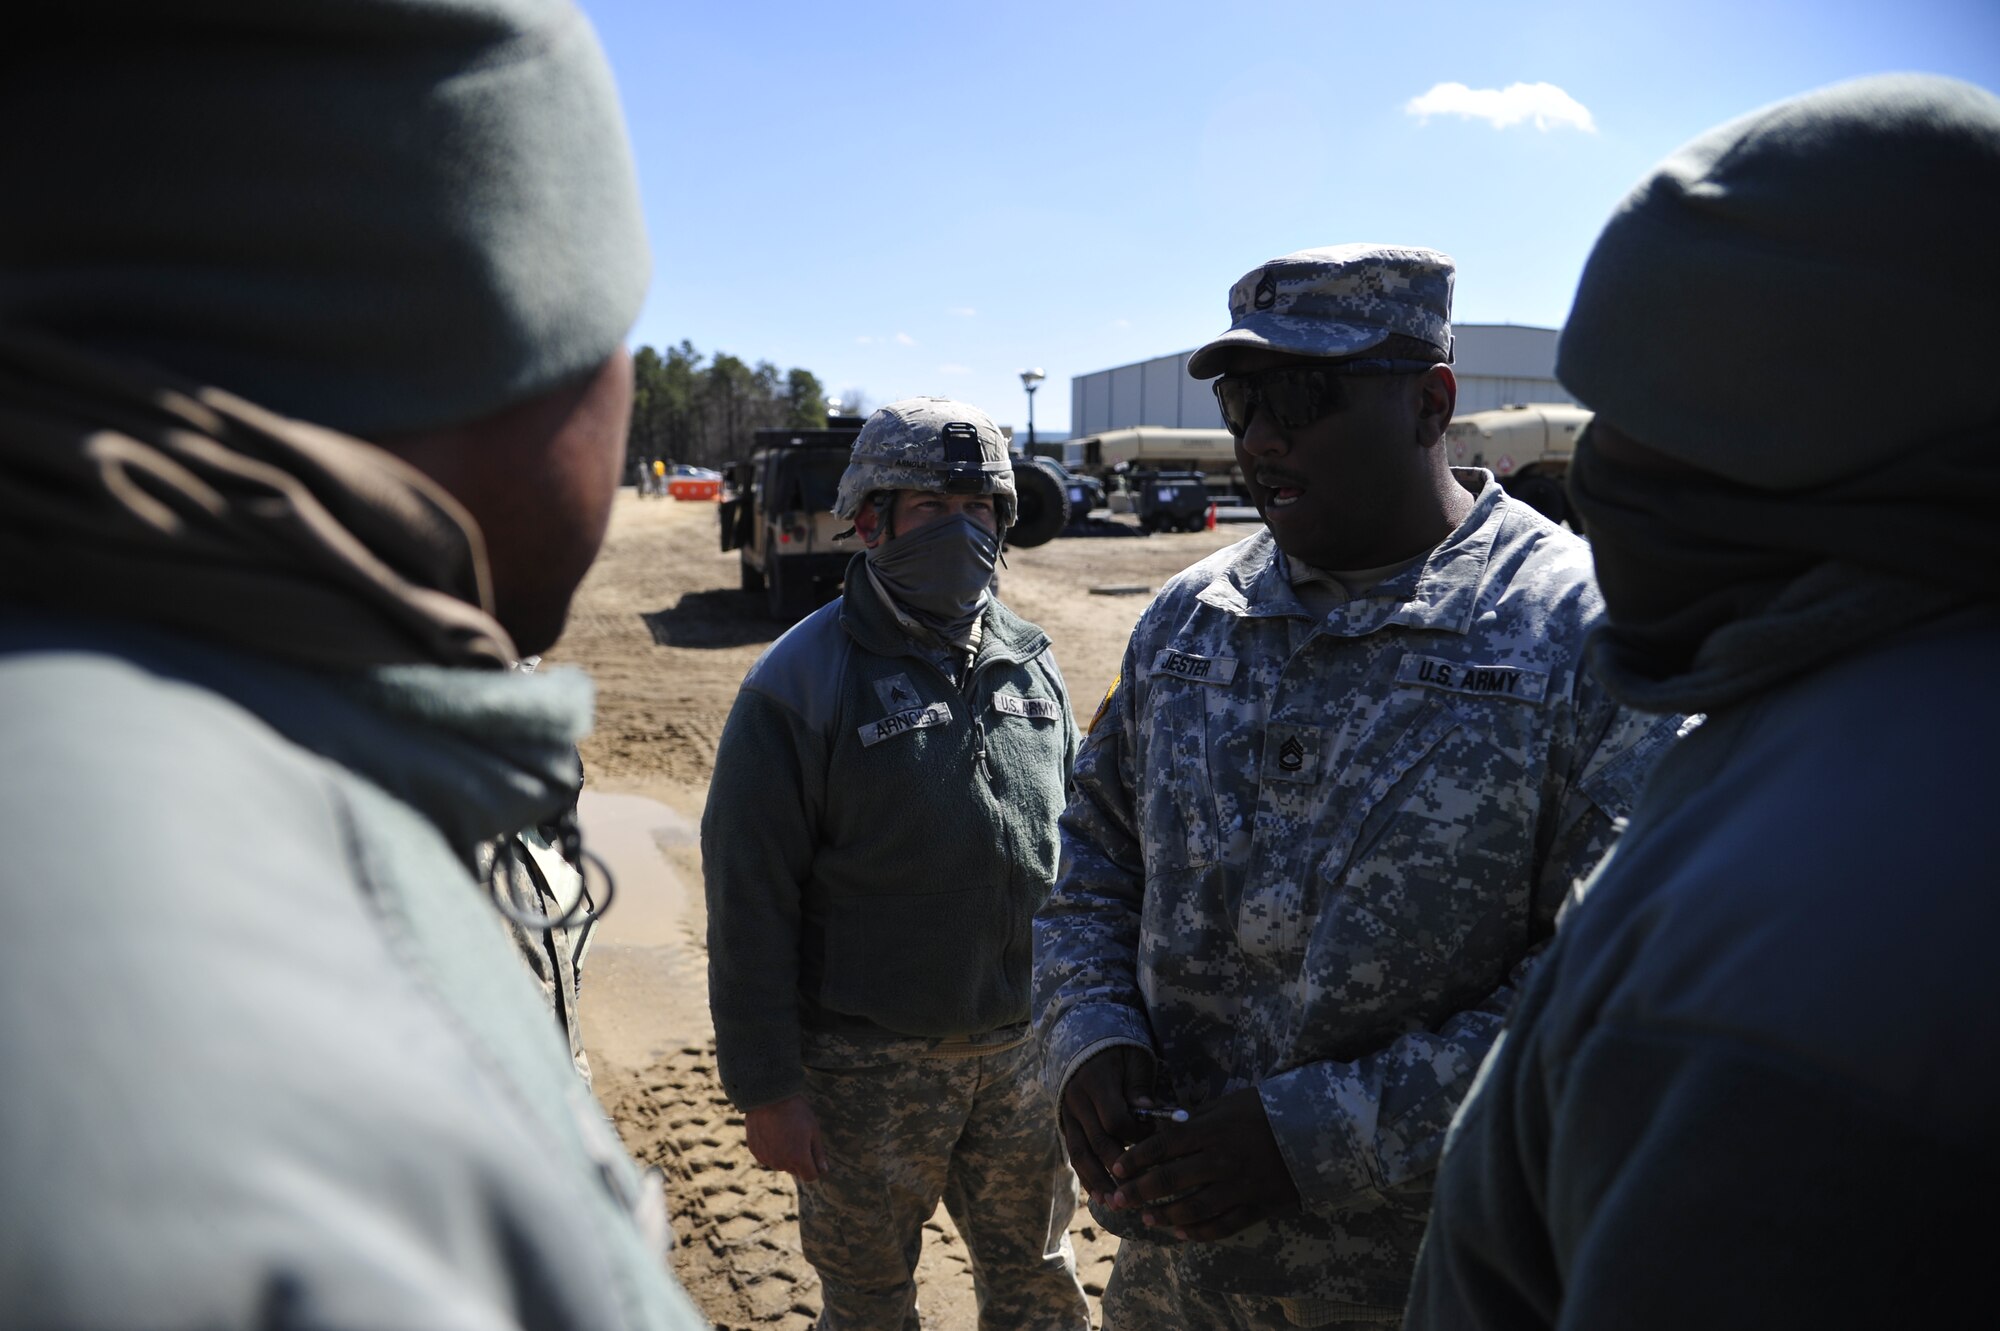 JOINT BASE MCGUIRE-DIX-LAKEHURST, N.J. -- U.S. Army Sgt 1st Class Conteras Jester, operations NCOIC for the 690th Rapid Port Opening Element based at Joint Base Langley-Eustis, Va., speaks with surface distribution drivers during an operational pause at Lakehurst March 20, 2013. The 690th RPOE was deployed alongside the 621st Contingency Response Wing at JBMDL for a U.S. Transportation Command Joint Task Force Validation exercise Eagle Flag 13-2. (U.S. Air Force photo by Tech. Sgt. Parker Gyokeres/Released)